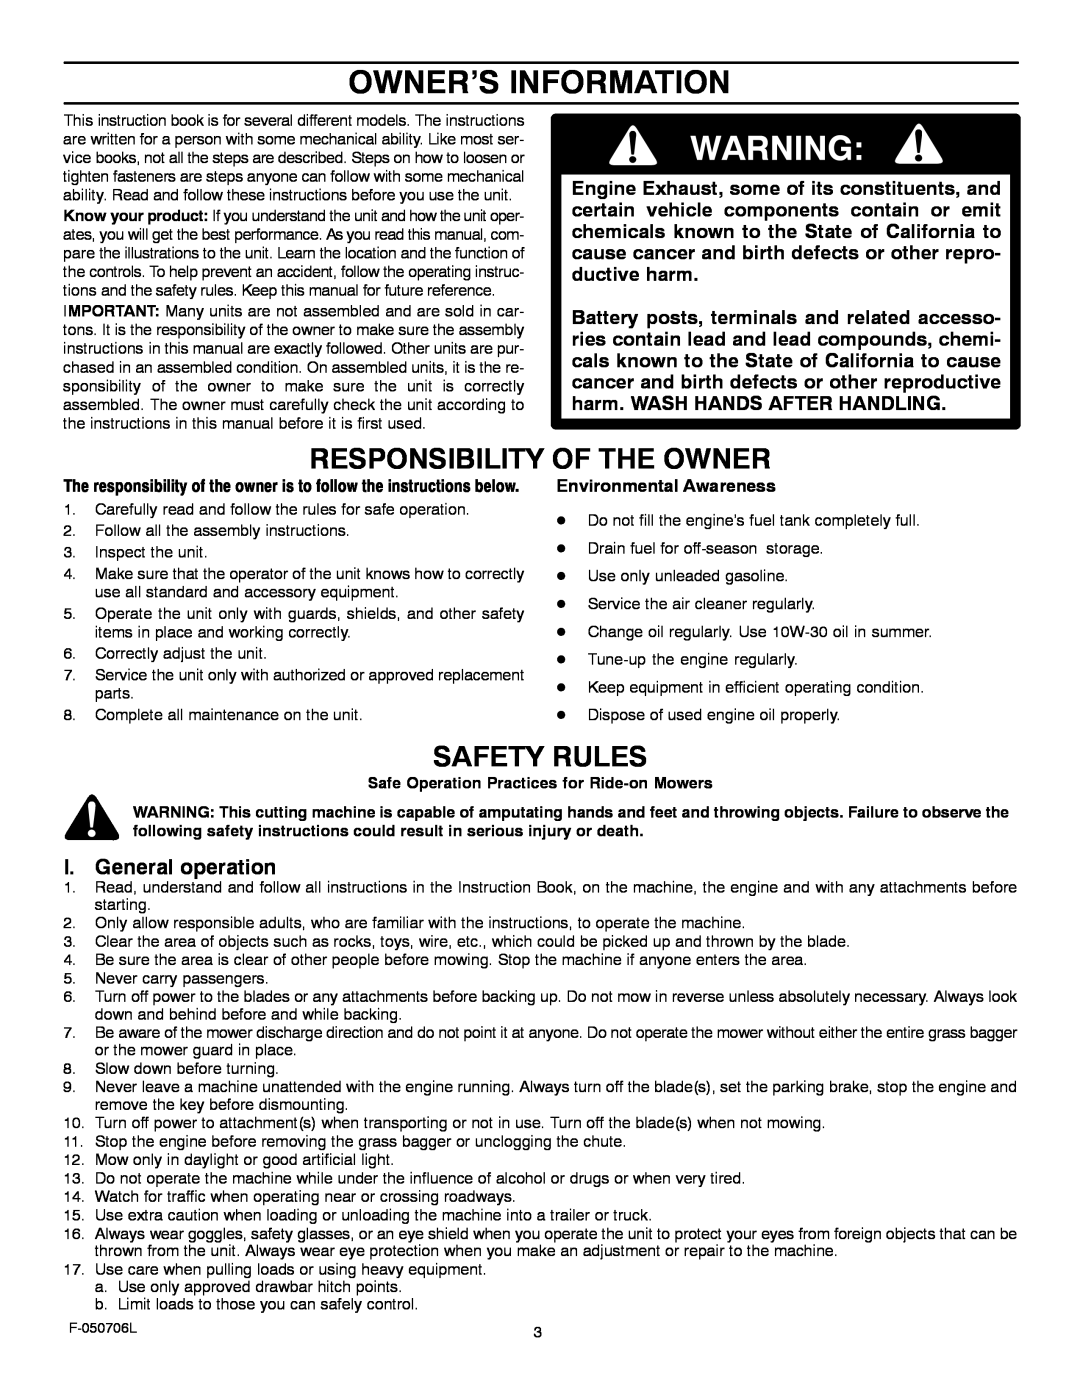 Murray 425014x92B manual Owner’S Information, Responsibility Of The Owner, Safety Rules, I. General operation 